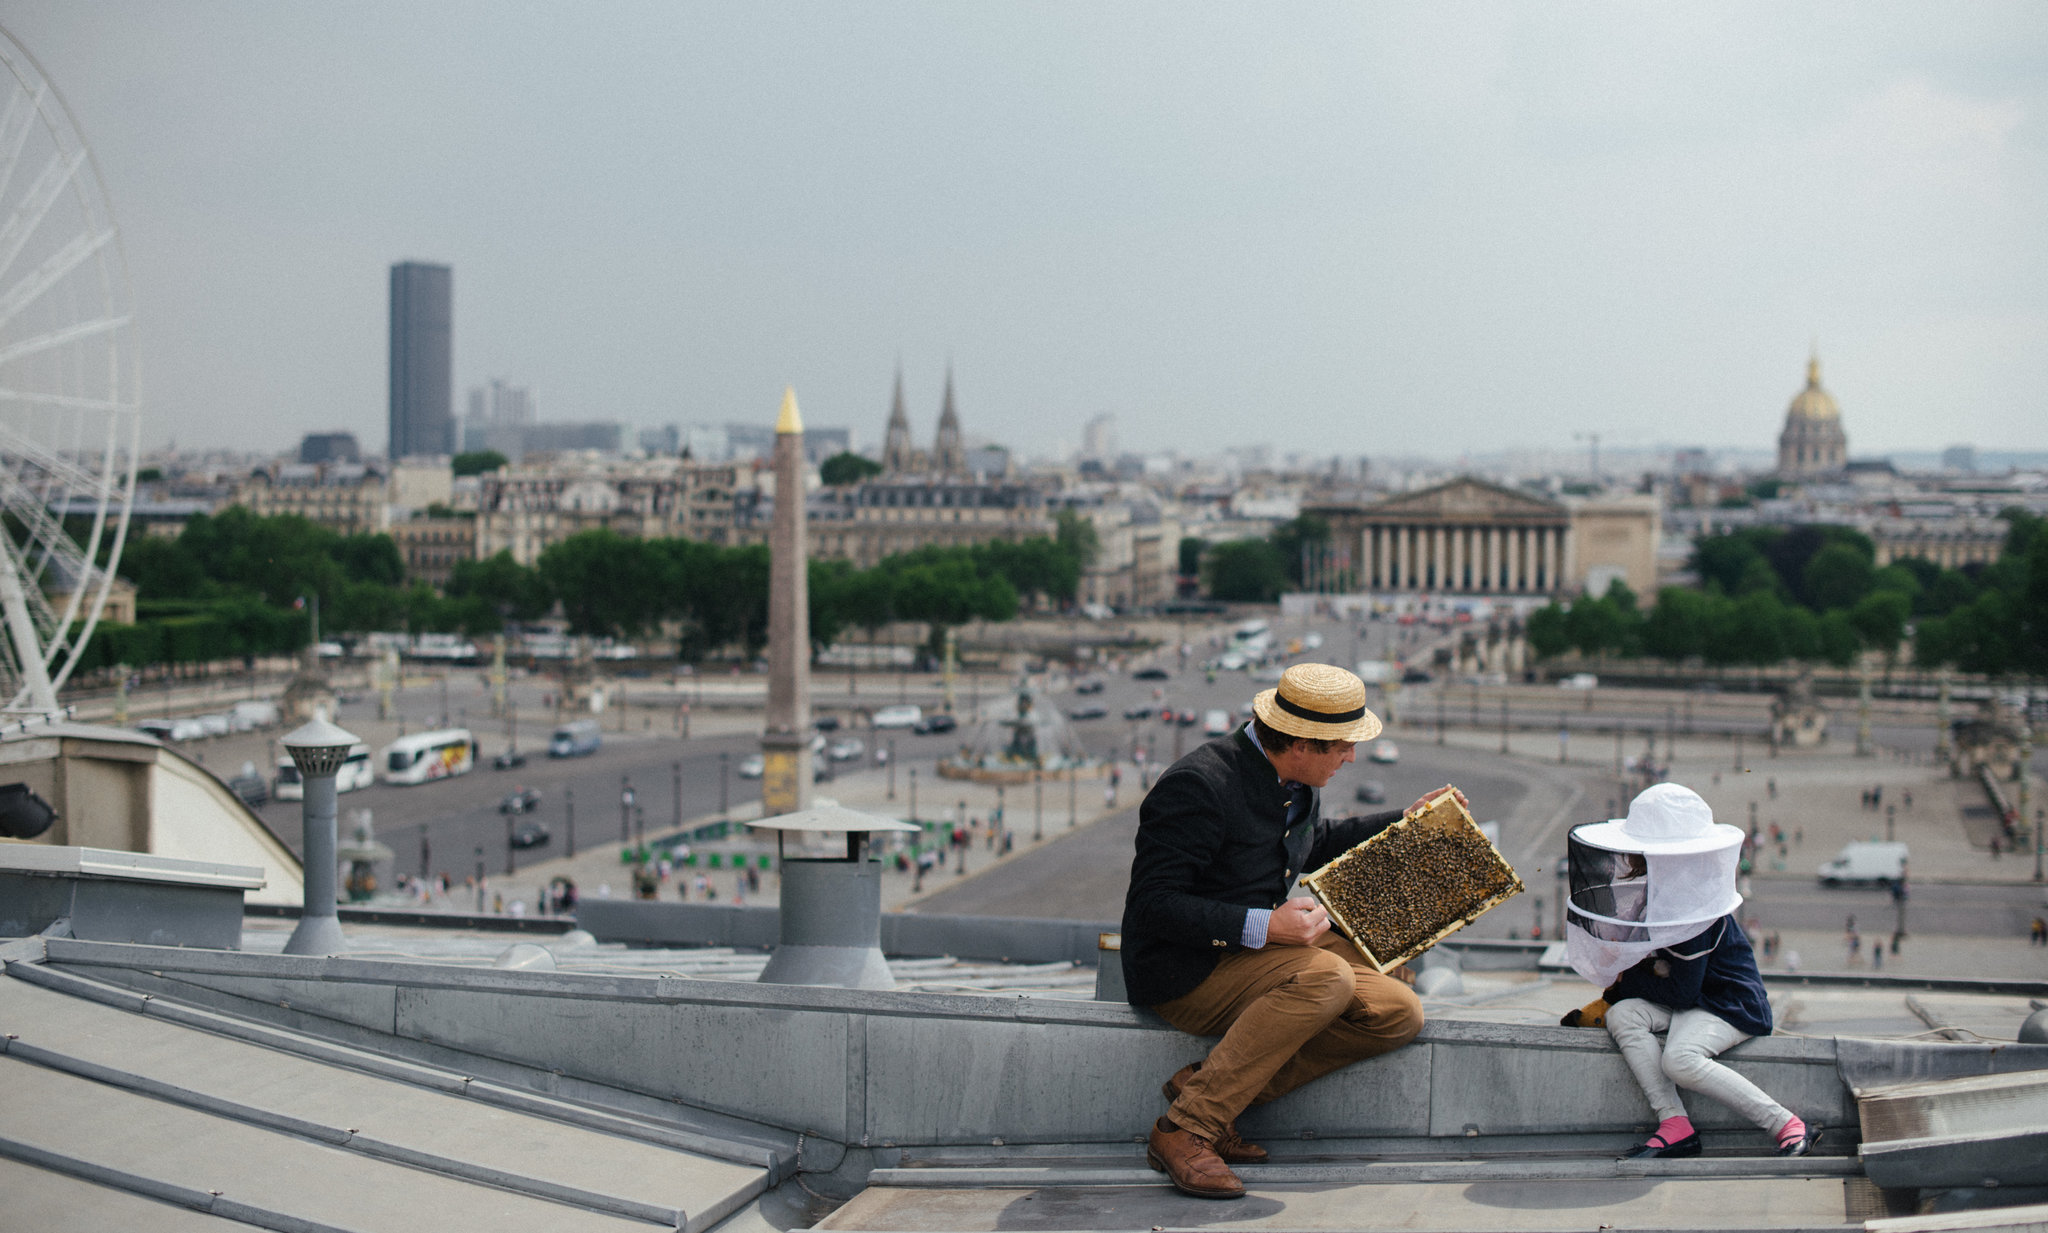  Audric de Campeau working with his daughter on his hives above the Place de la Concorde.   